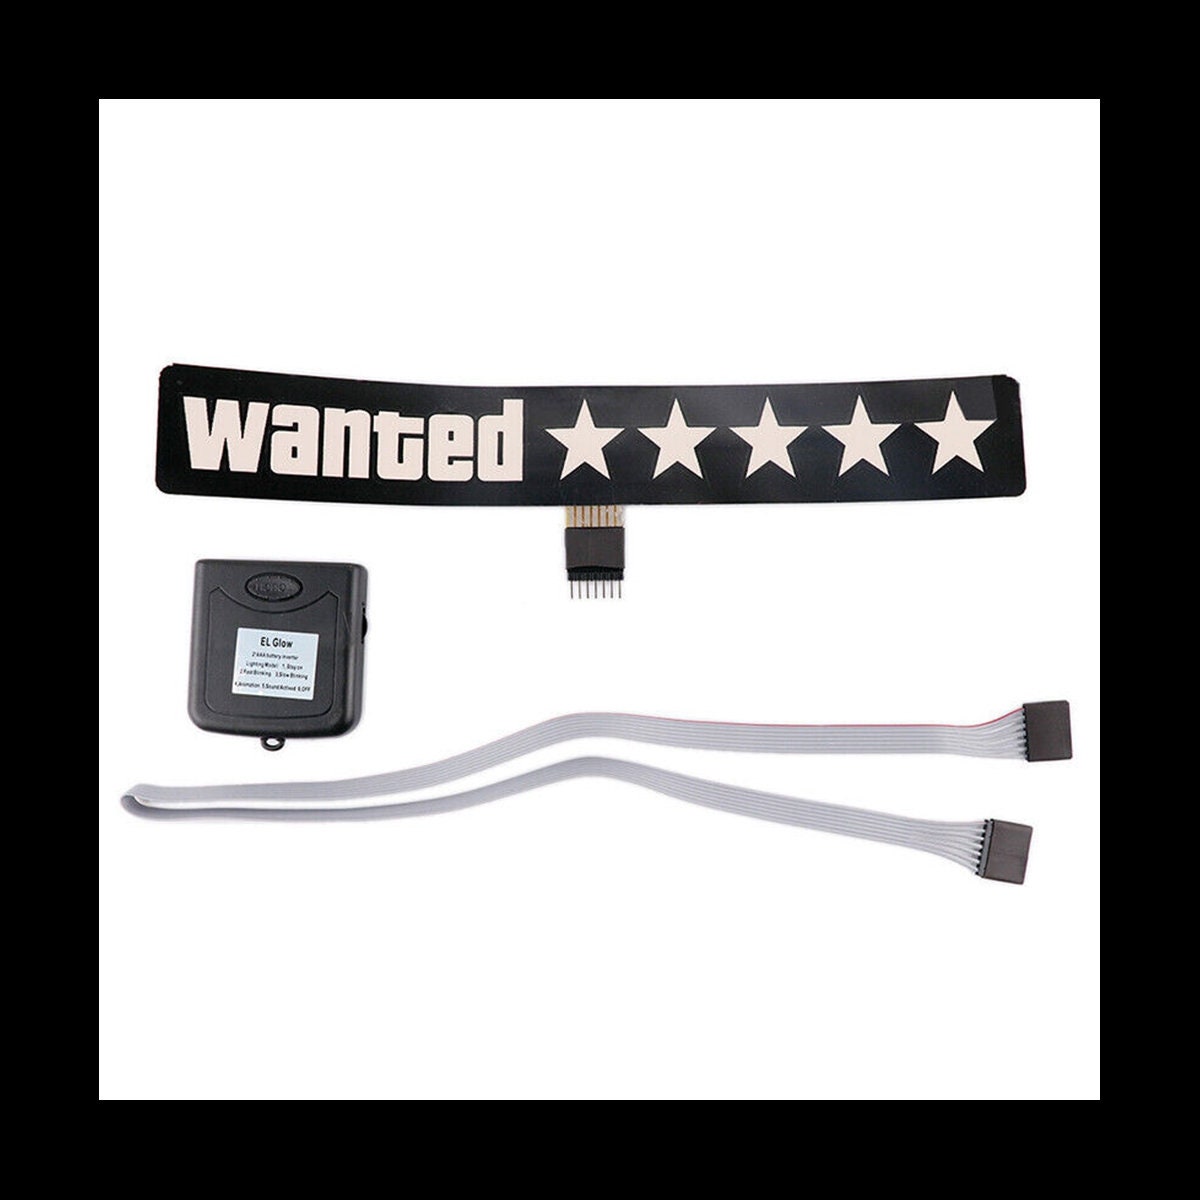 Wanted LED EL Glow Panel Light For Car GTA at Rs 1324, LED Panel Light